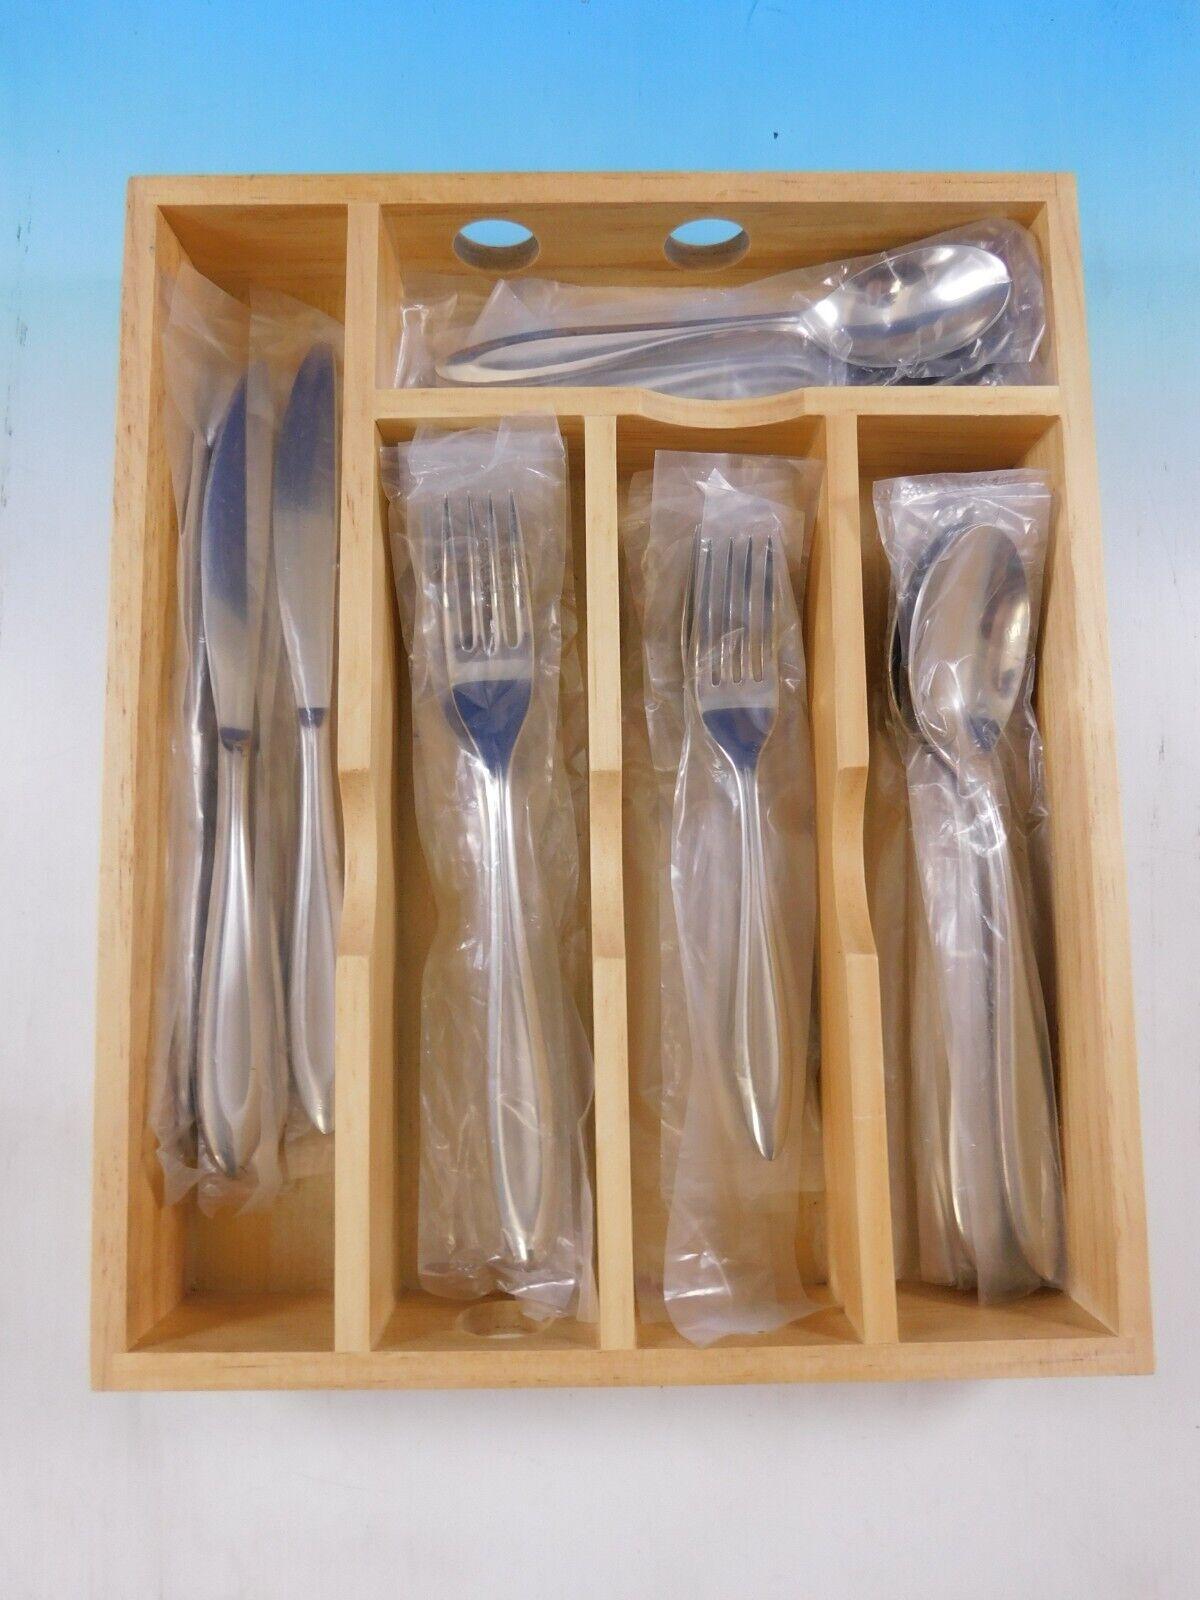 Fontur Satin by Ginkgo Stainless Steel Flatware set, 20 pieces. This set includes:

4 Dinner Knives, 9 1/4